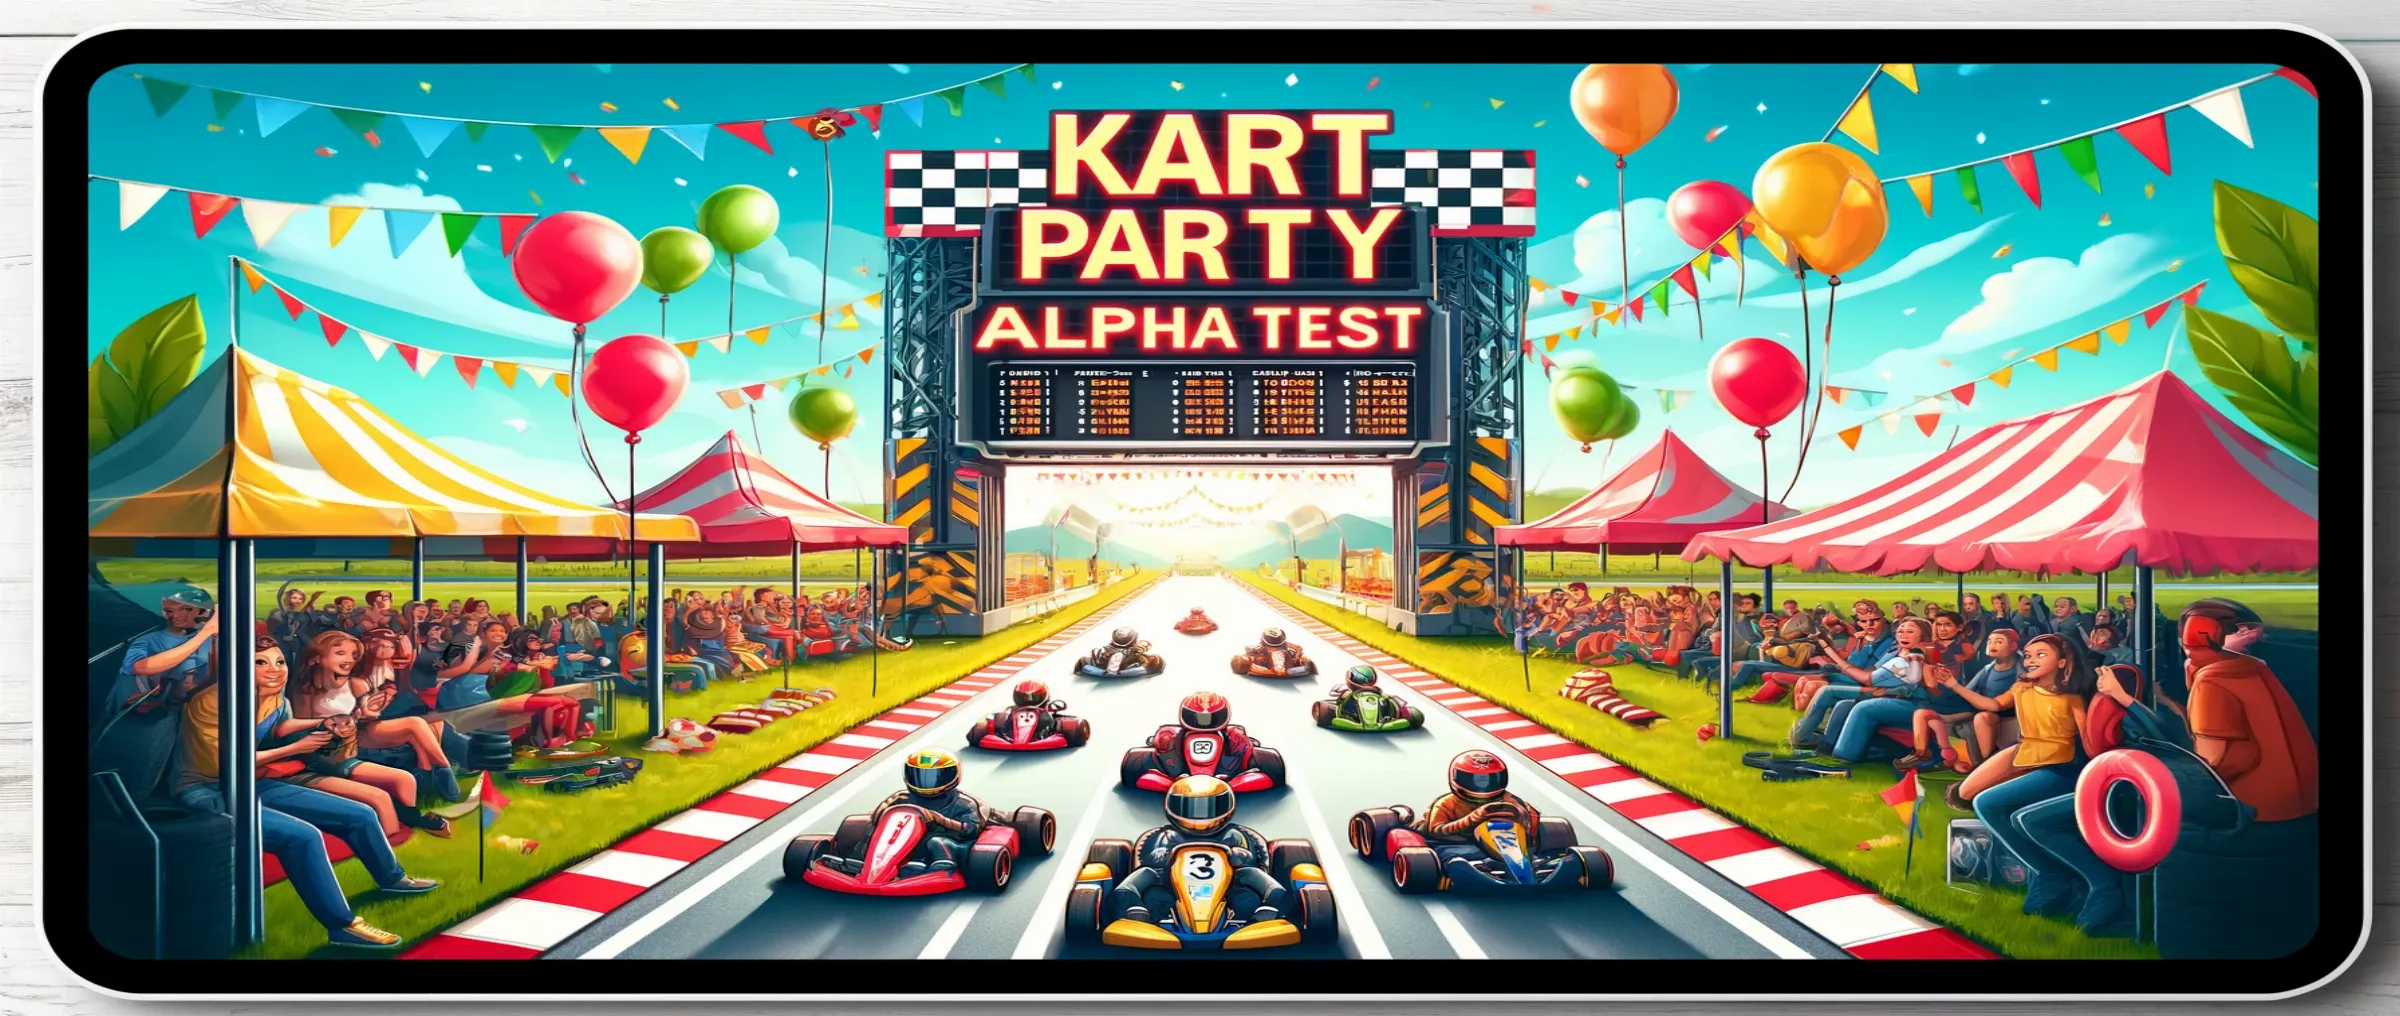 Kart Party is Preparing for Its Initial Alpha Testing